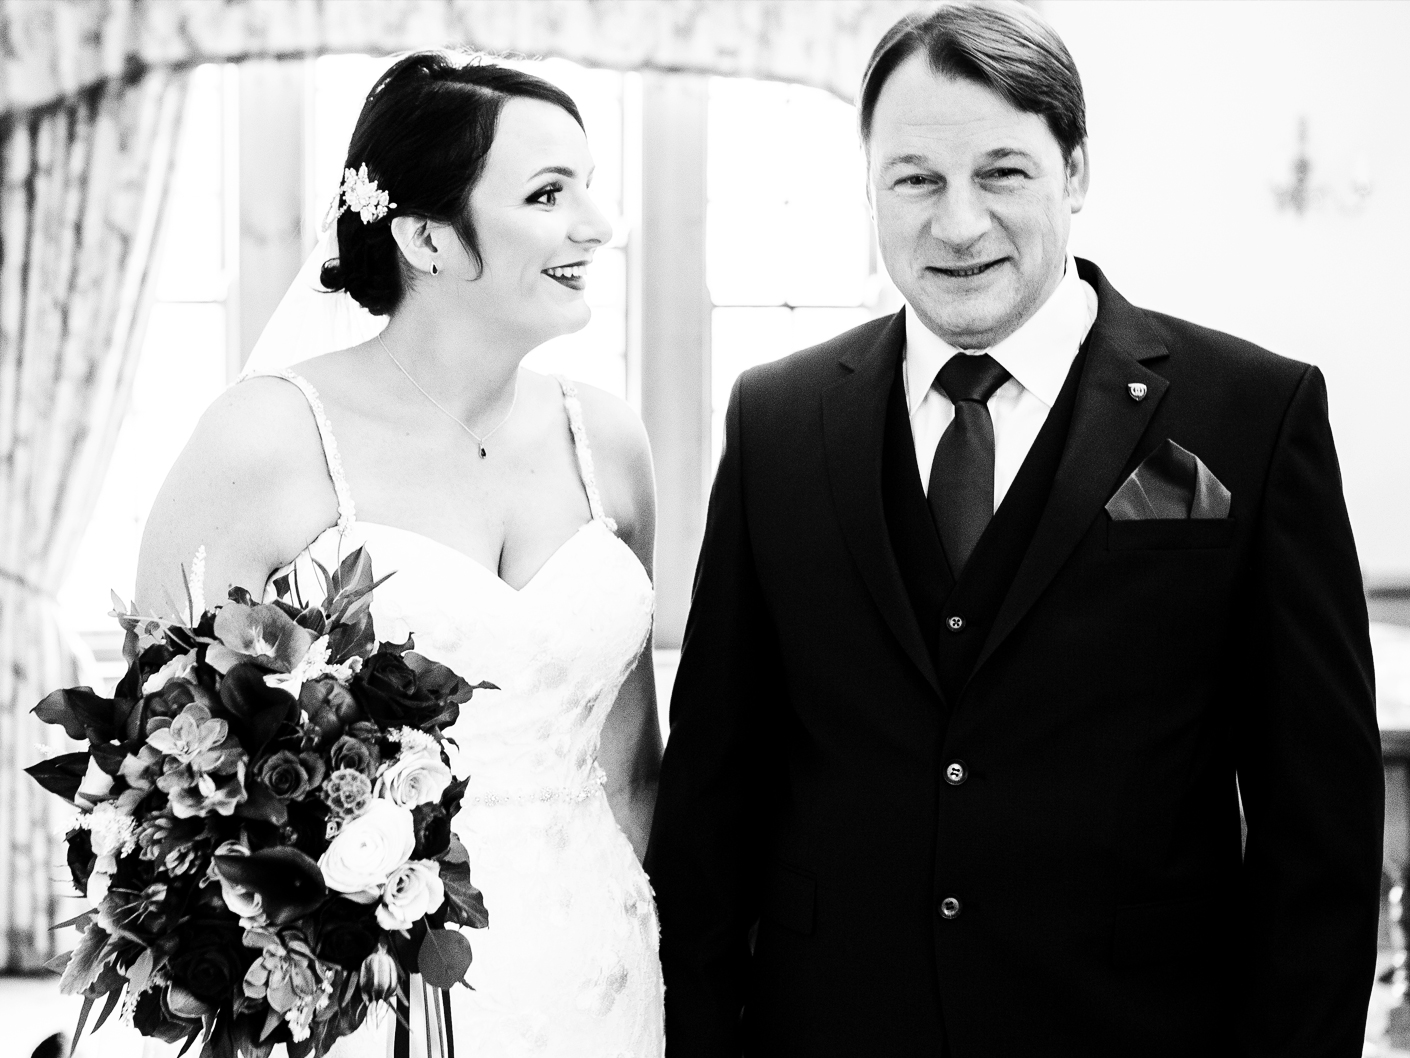 the-father-of-the-bride-and-the-bride-before-the-wedding-ceremony-in-cheshire